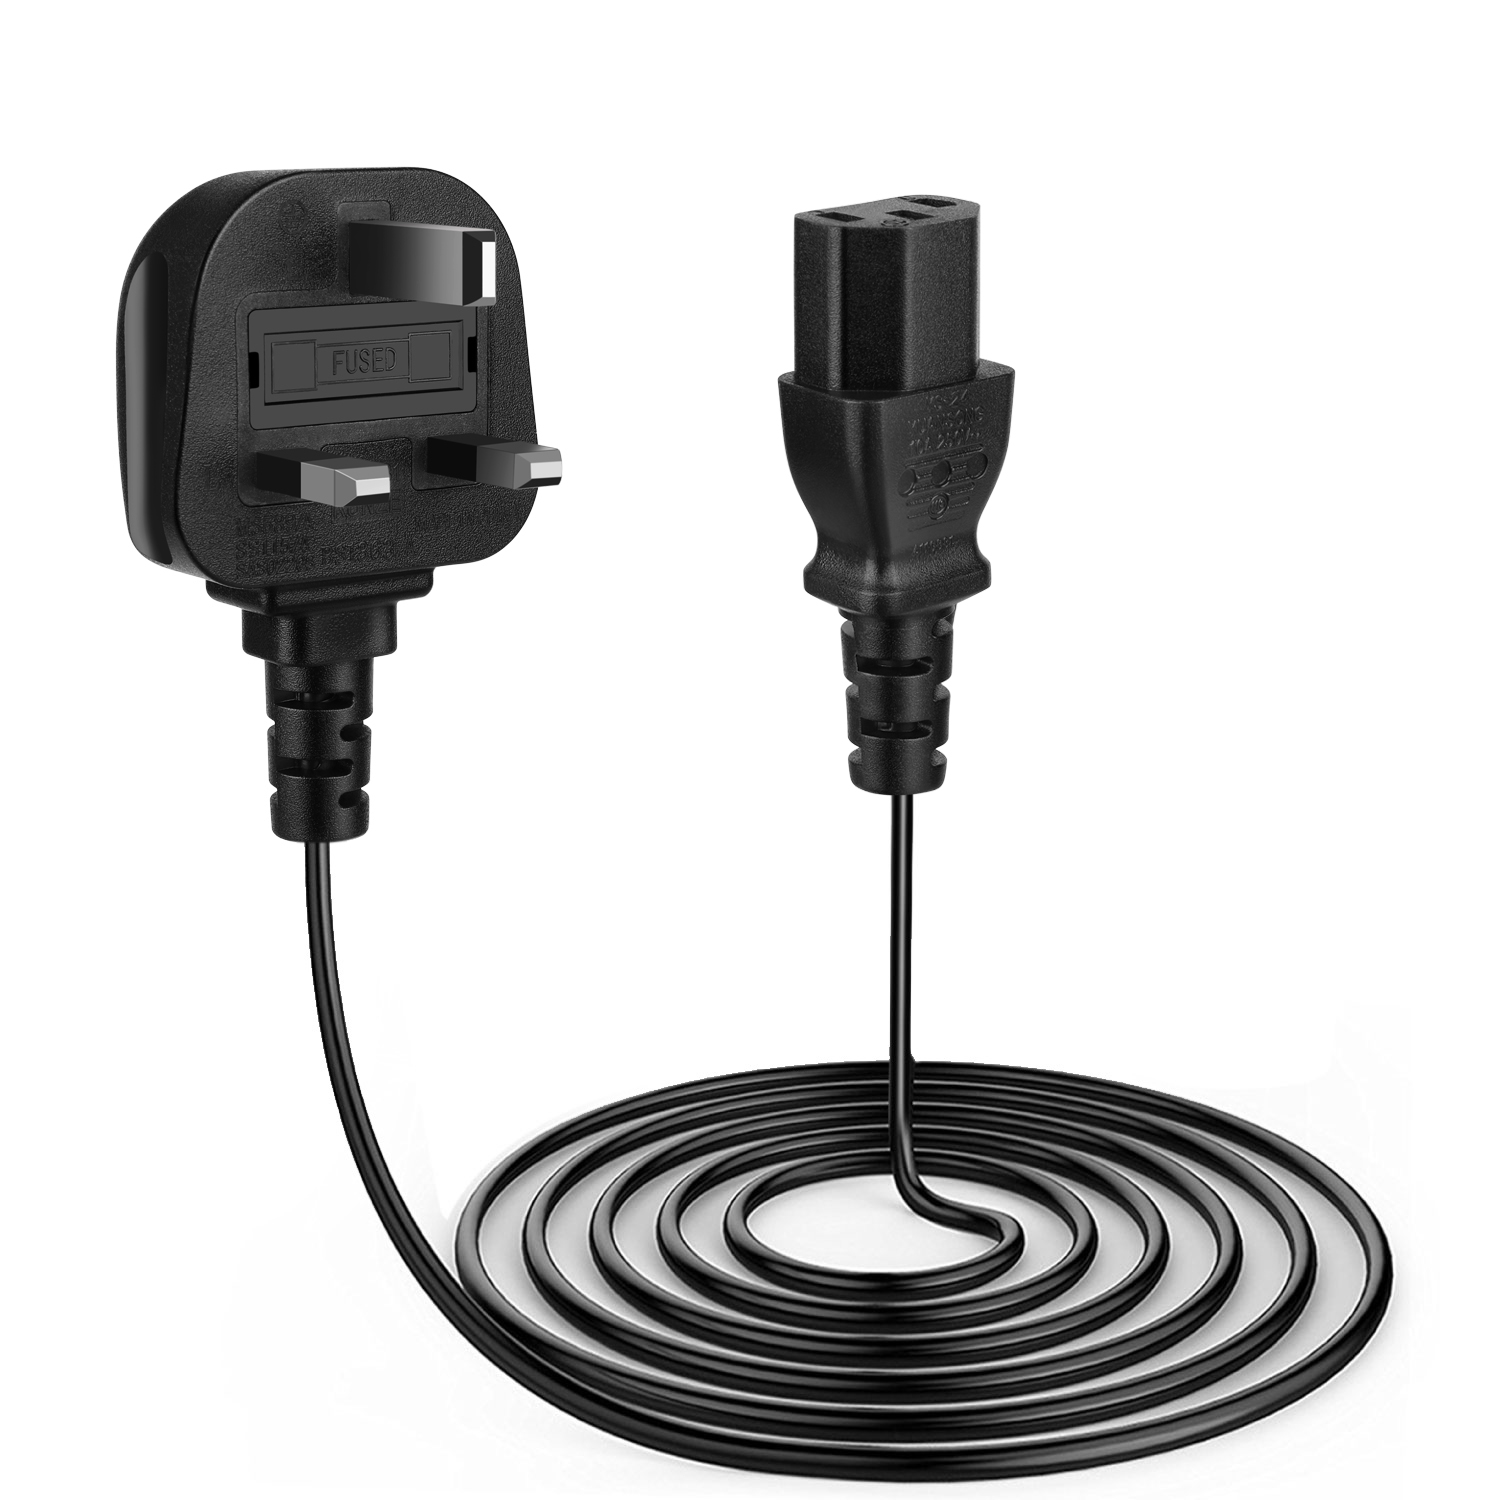 Female to male cable connects from your equipment socket to a standard 3 pronged AC outlet receptacle; The female connector plugs directly into the device while the male connector plugs into a standard outlet wall plug